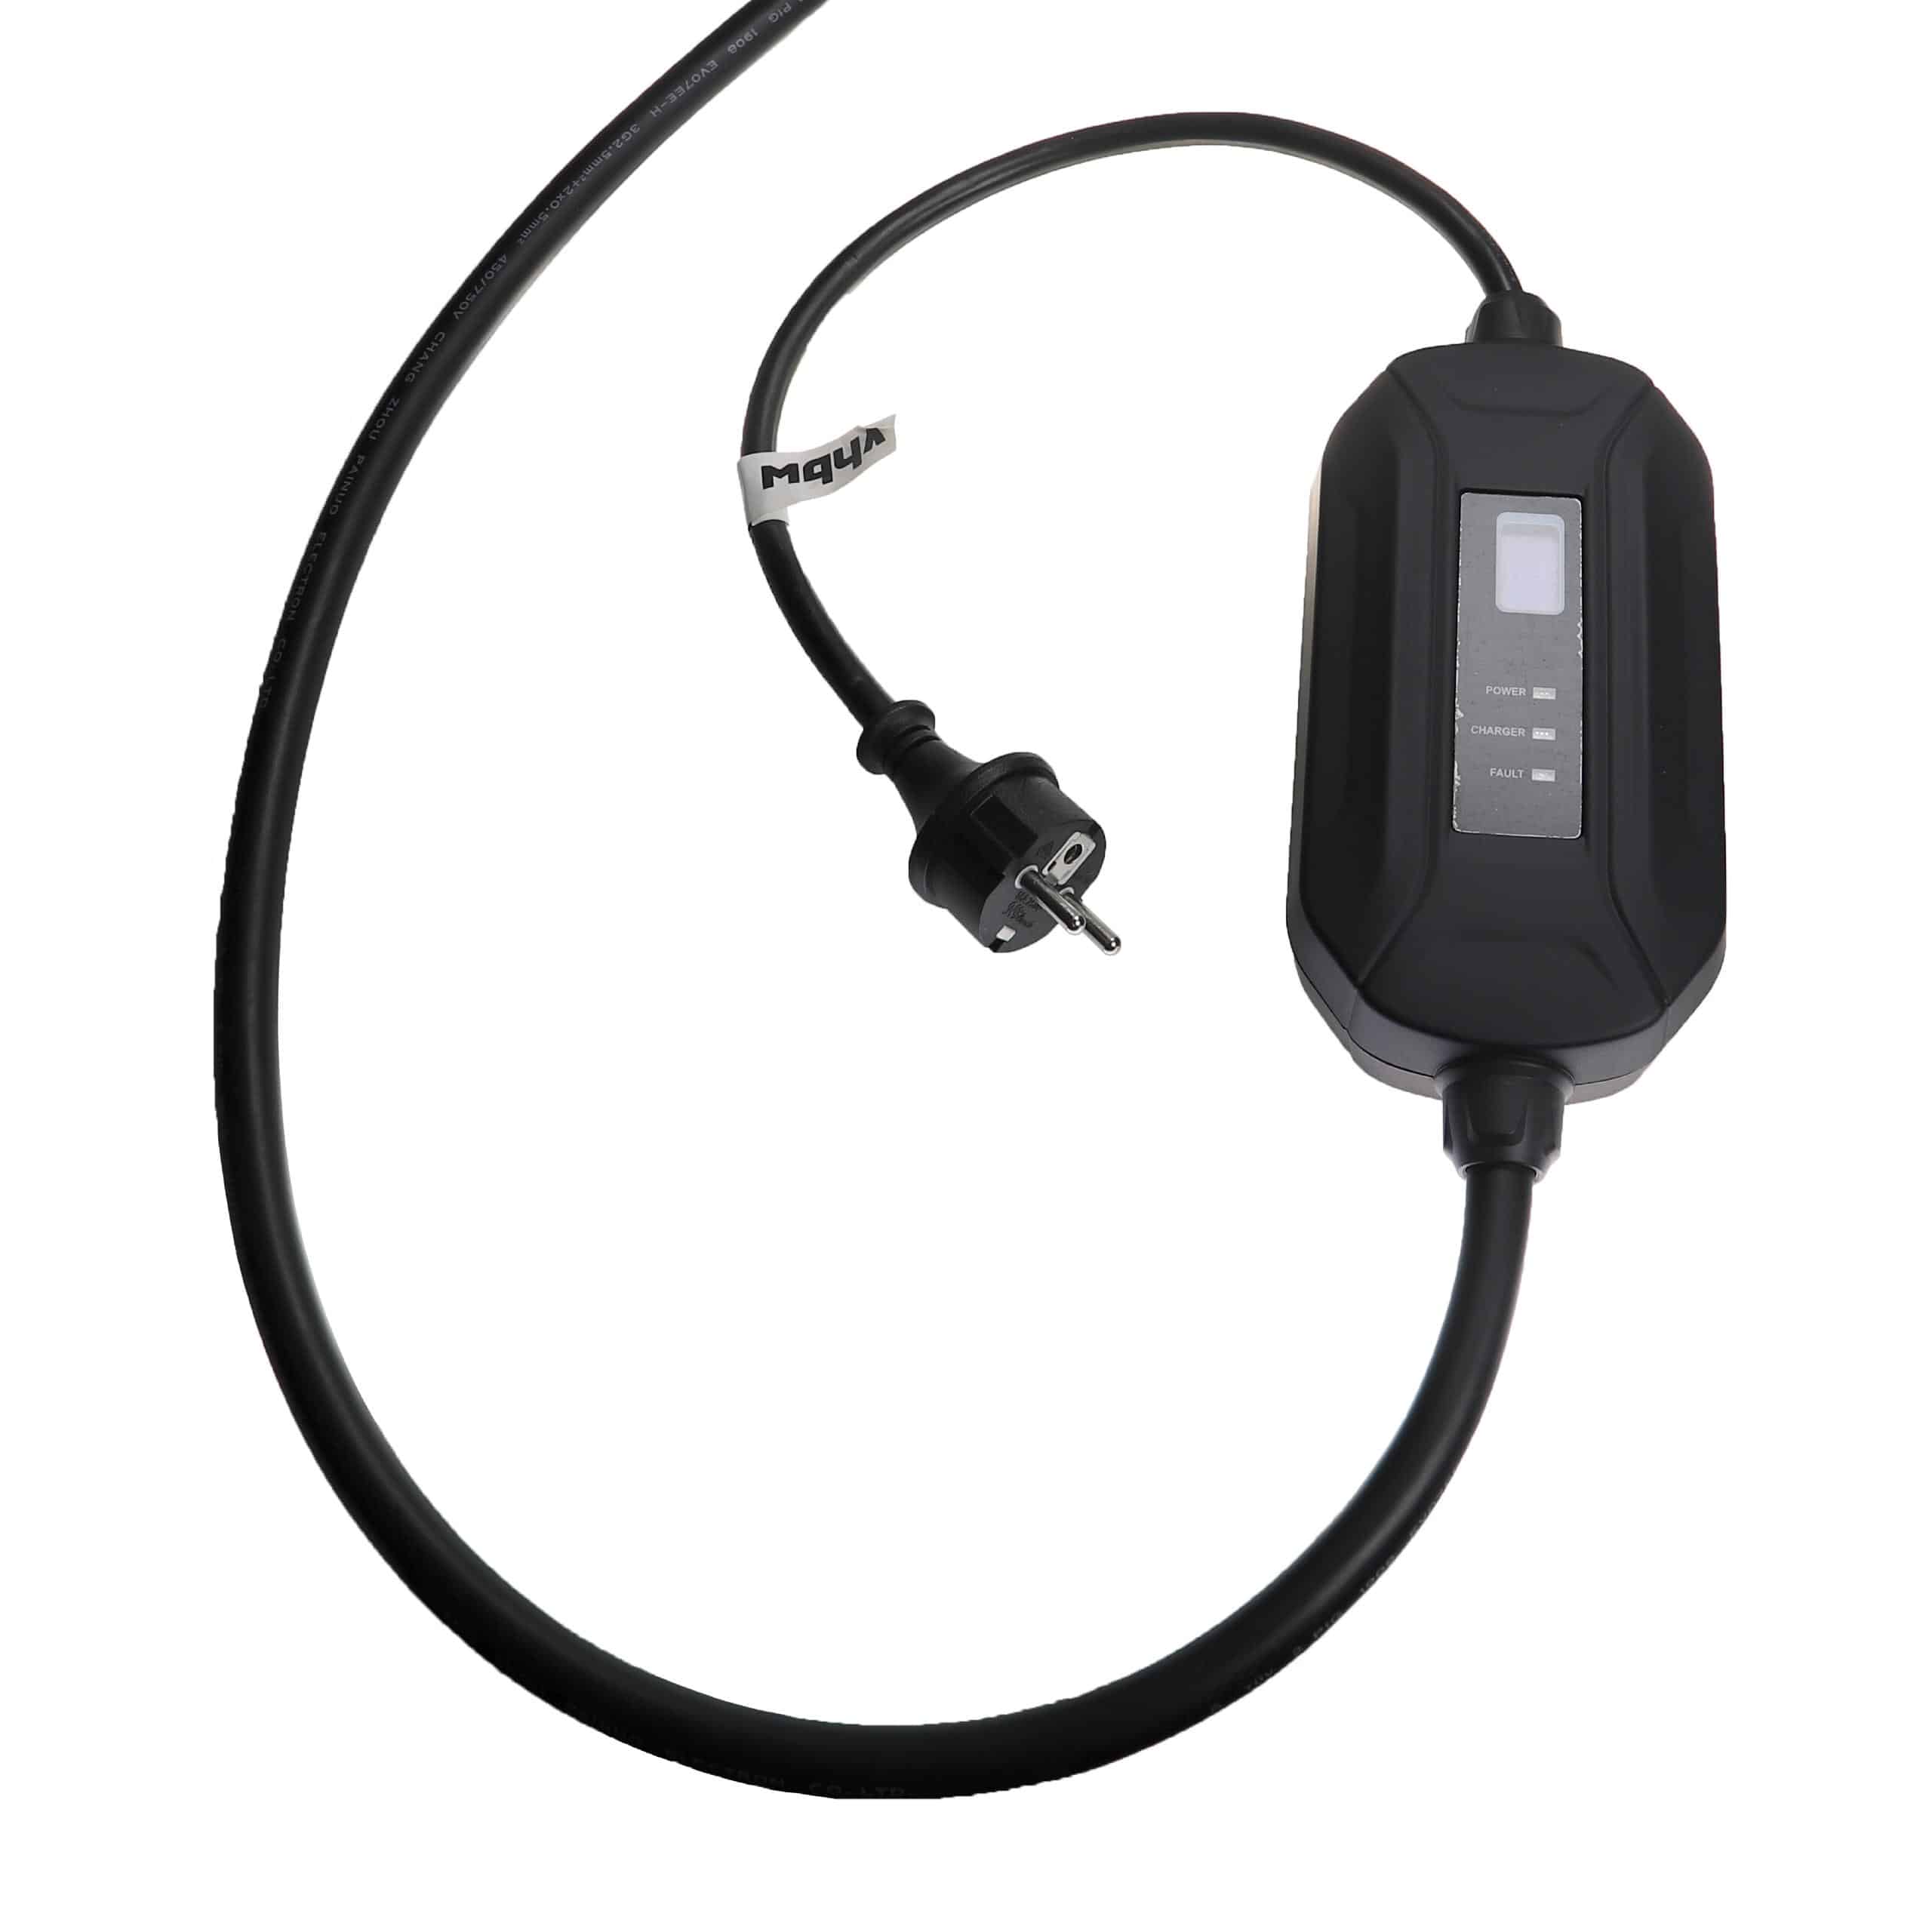 Charging Cable for Electric Car, Plug-In Hybrid - Type 2 to Euro Socket Cable, Single-Phase, 16 A, 3.5 kW, 7 m